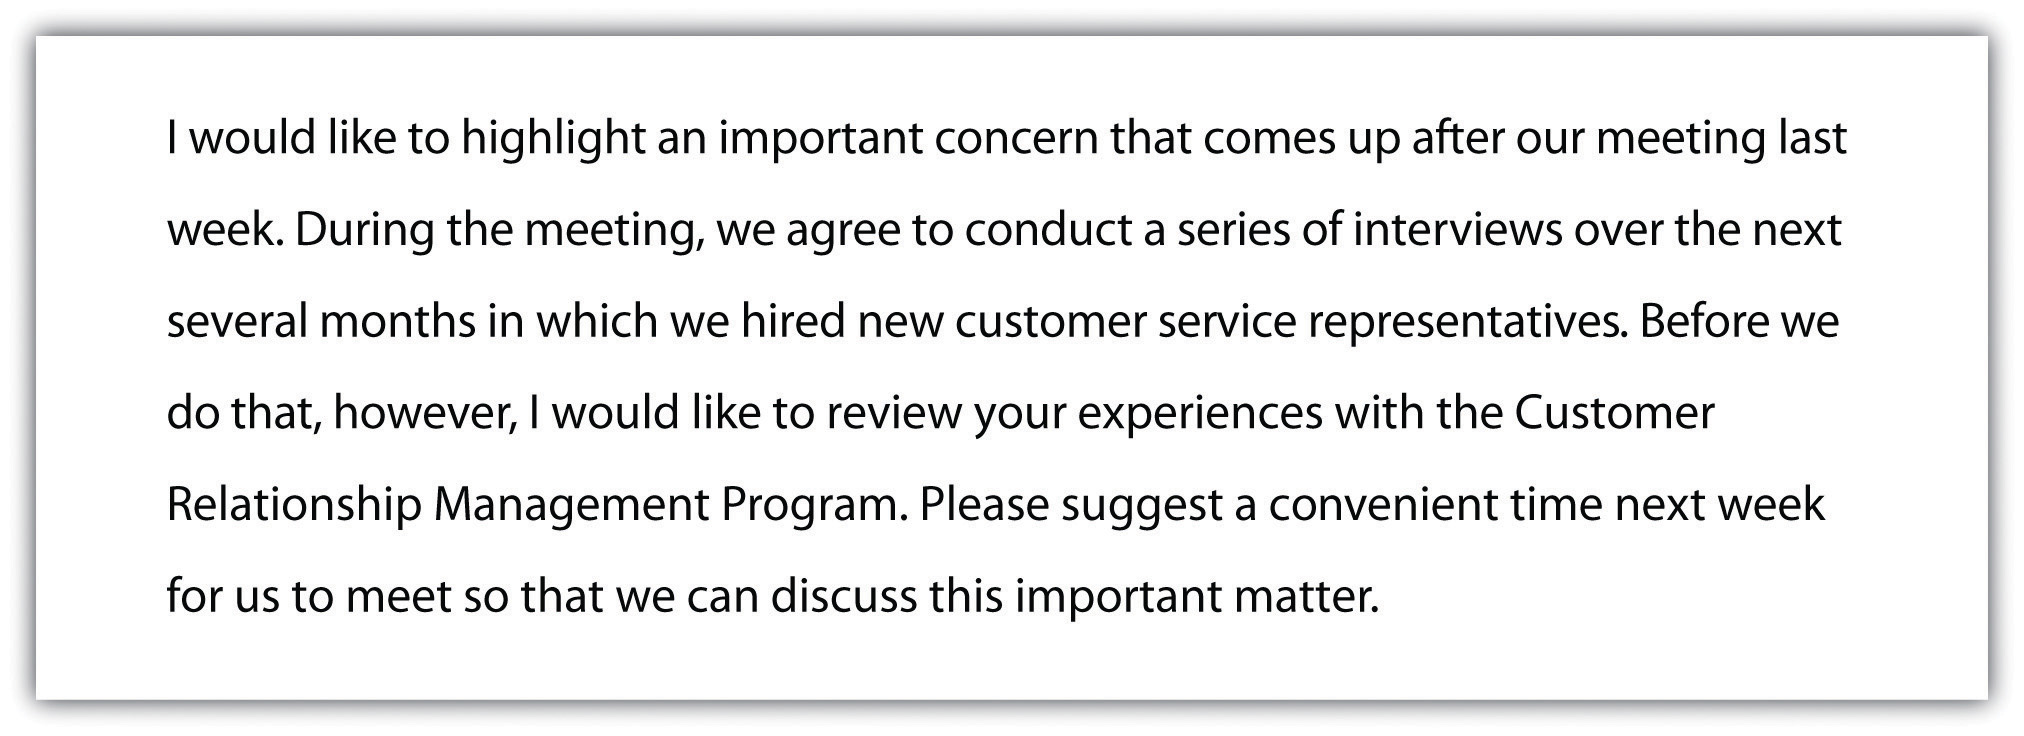 I would like to highlight an important concern that comes up after our meeting last week. During the meeting, we agree to conduct a series of interviews over the next several months in which we hired new customer service representatives. Before we do that, however, I would like to review your experiences with the Customer Relationship Management Program. Please suggest a convenient time next week for us to meet so that we can discuss this important matter.